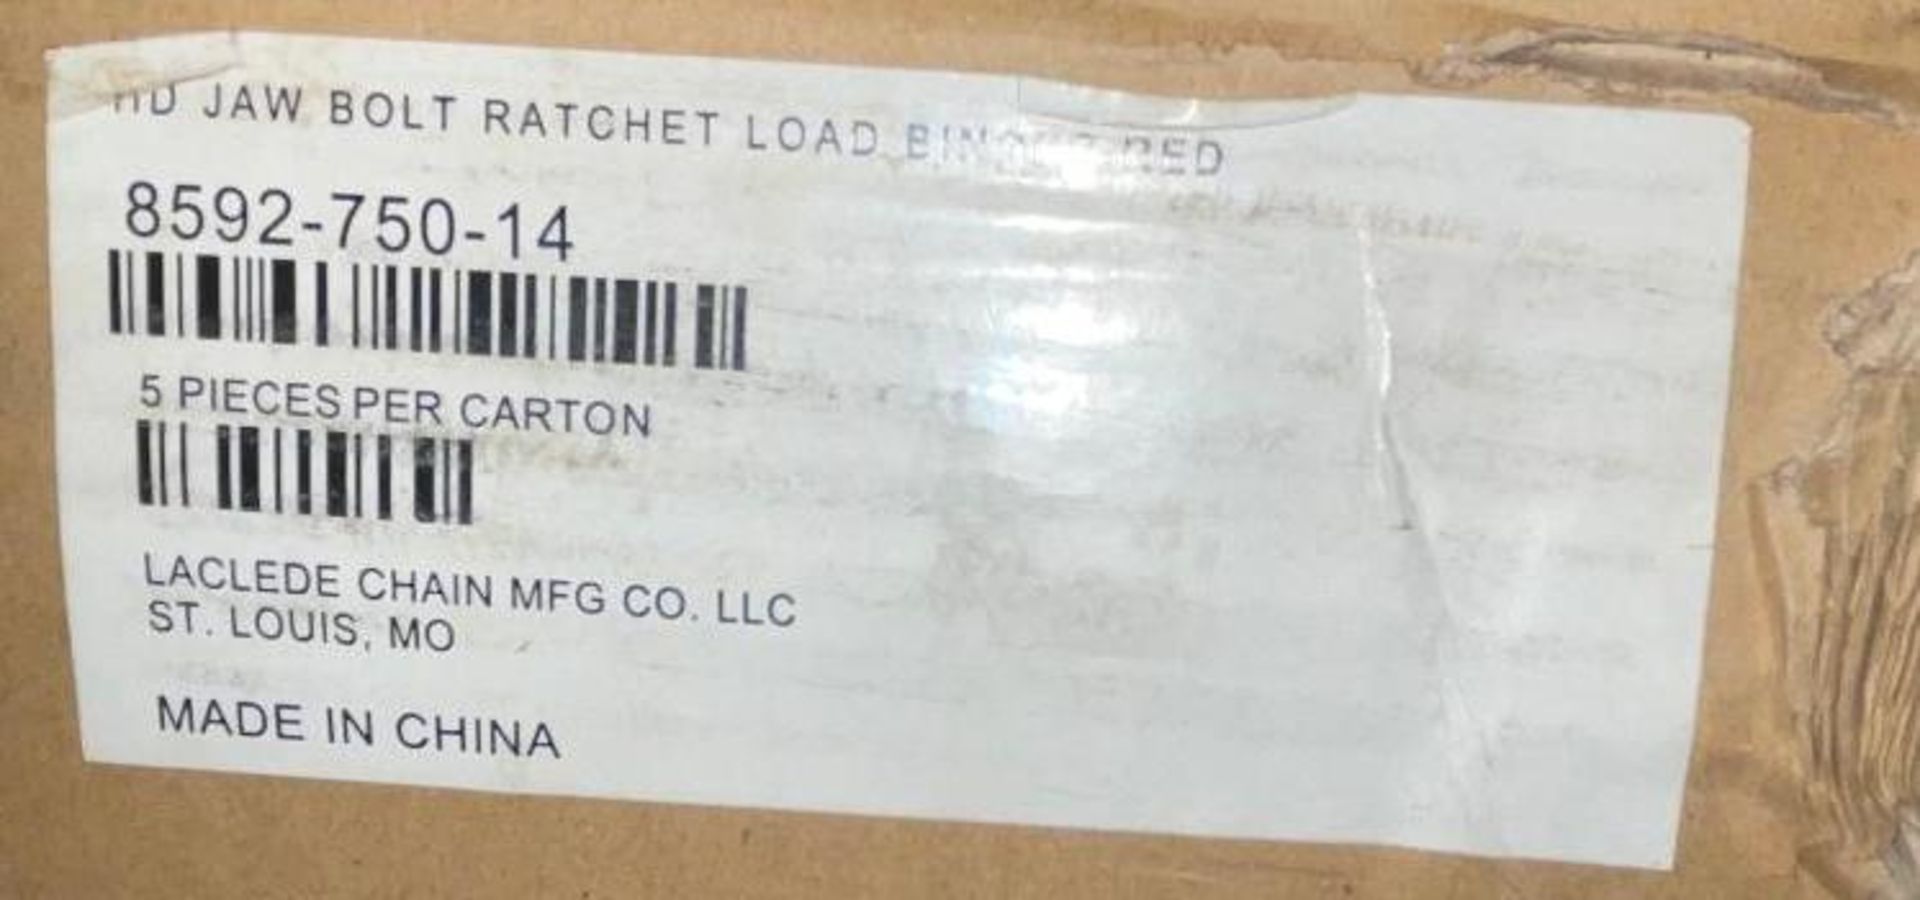 (10) HEAVY DUTY JAW BOLT RATCHET LOAD BINDER - (2) CASES BRAND / MODEL: LACLEDE CHAIN MFG CO 8592-75 - Image 3 of 5